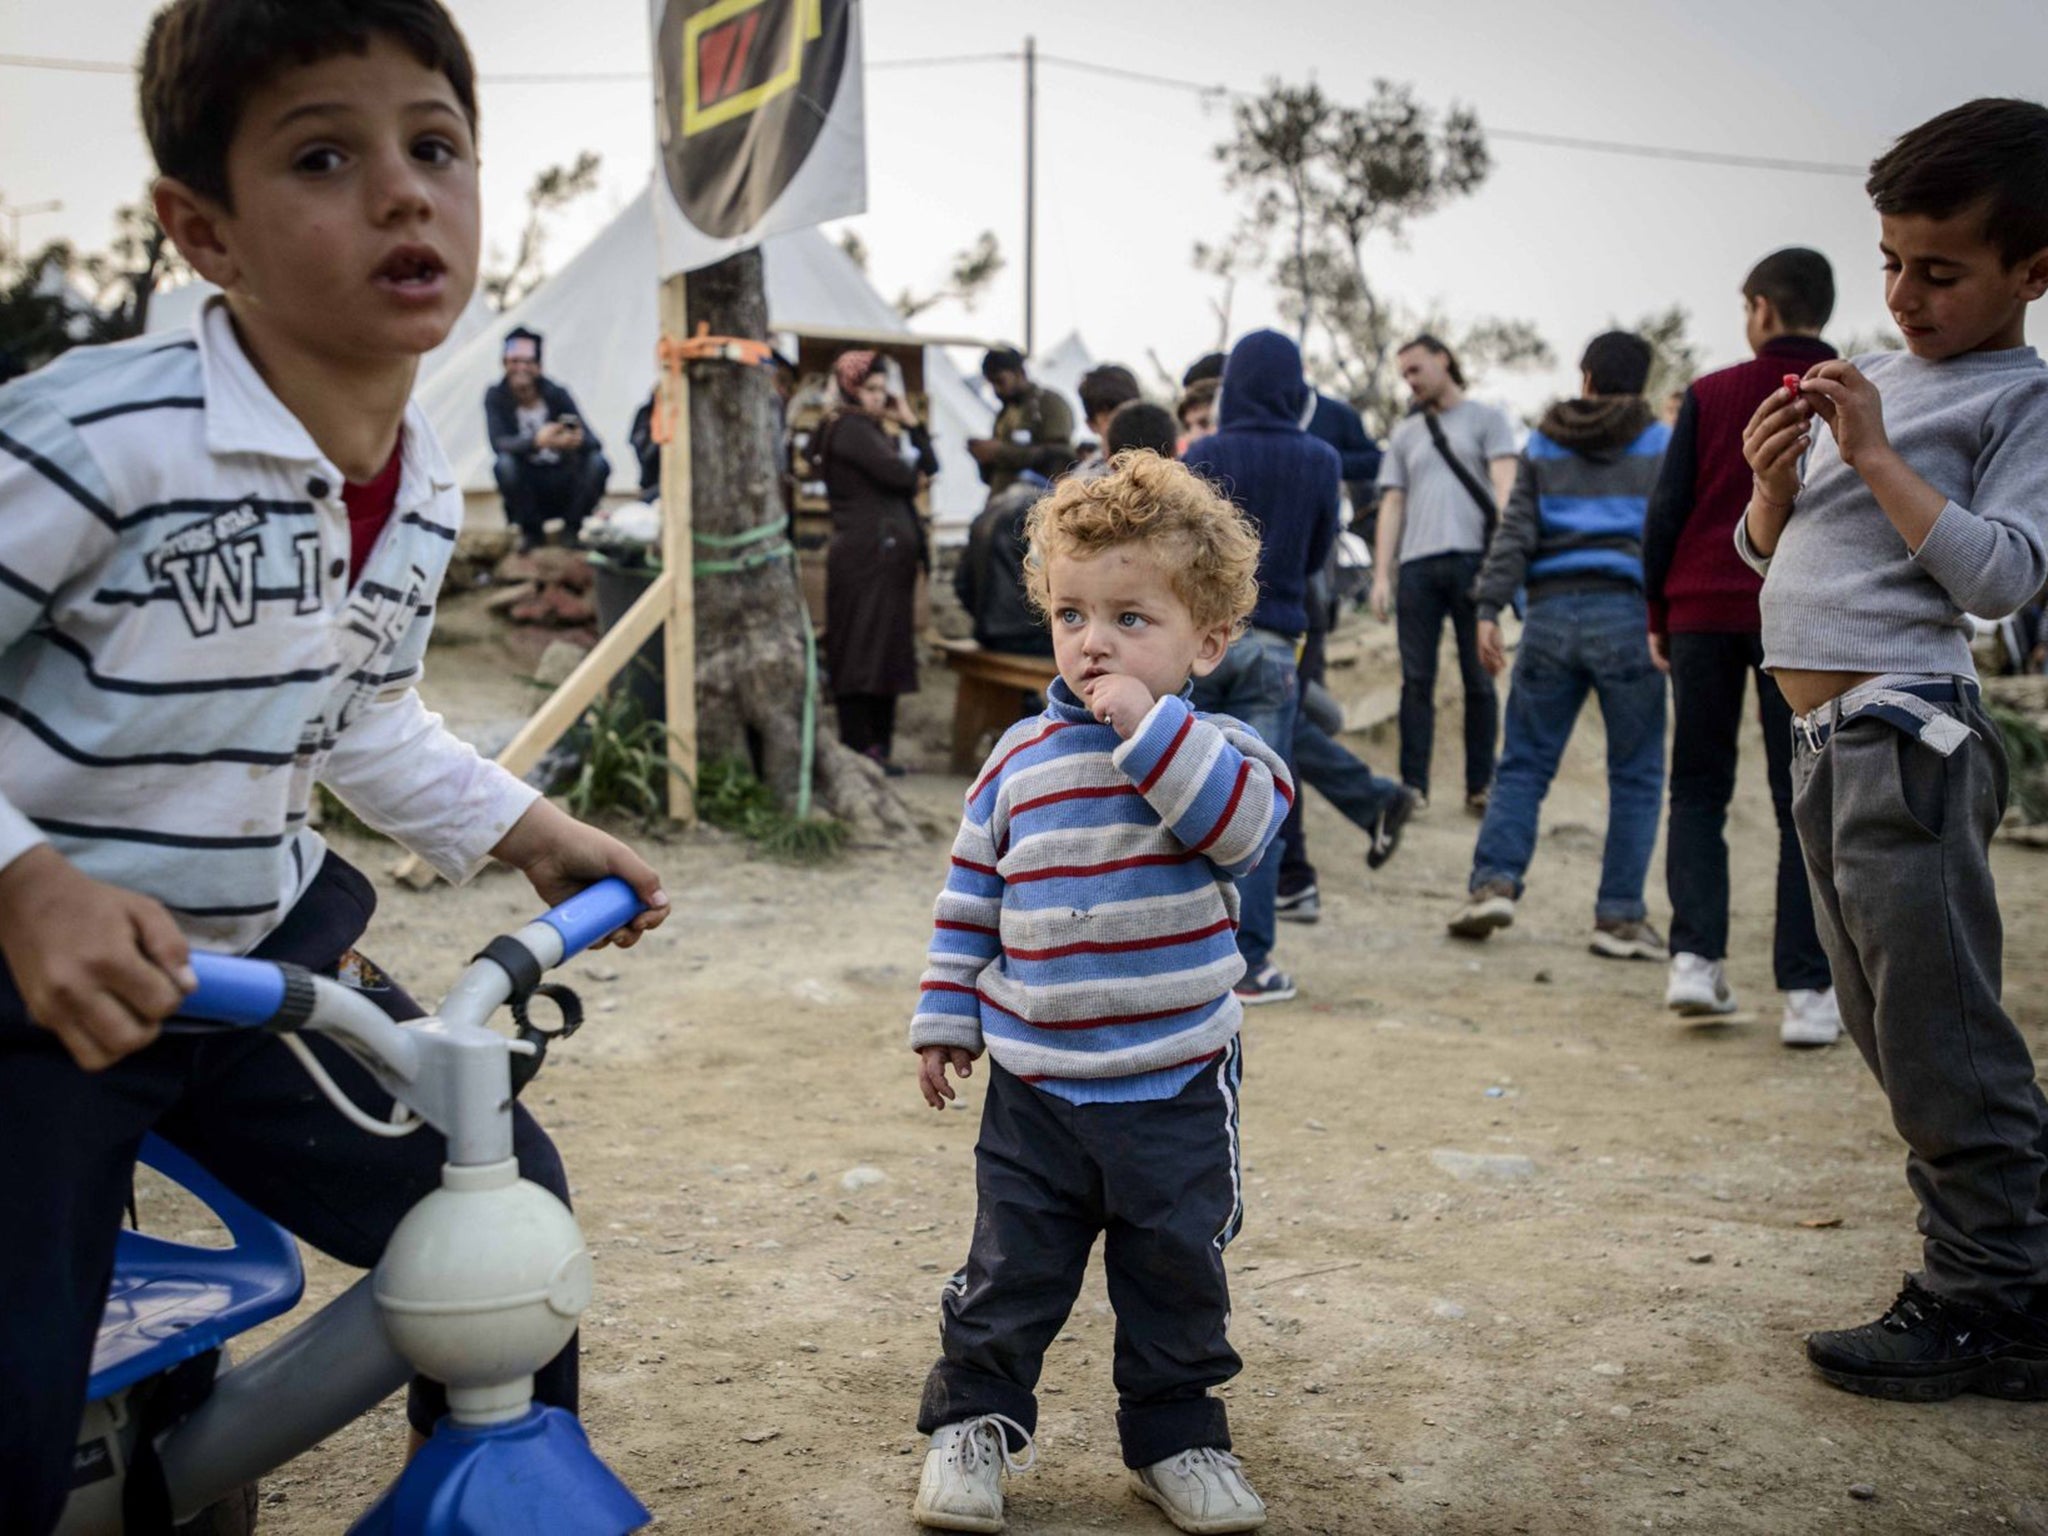 Children at Lesbos' Moria camp, which is guarded by police. Since the deal refugees are picked up by the coastguard and taken to the site